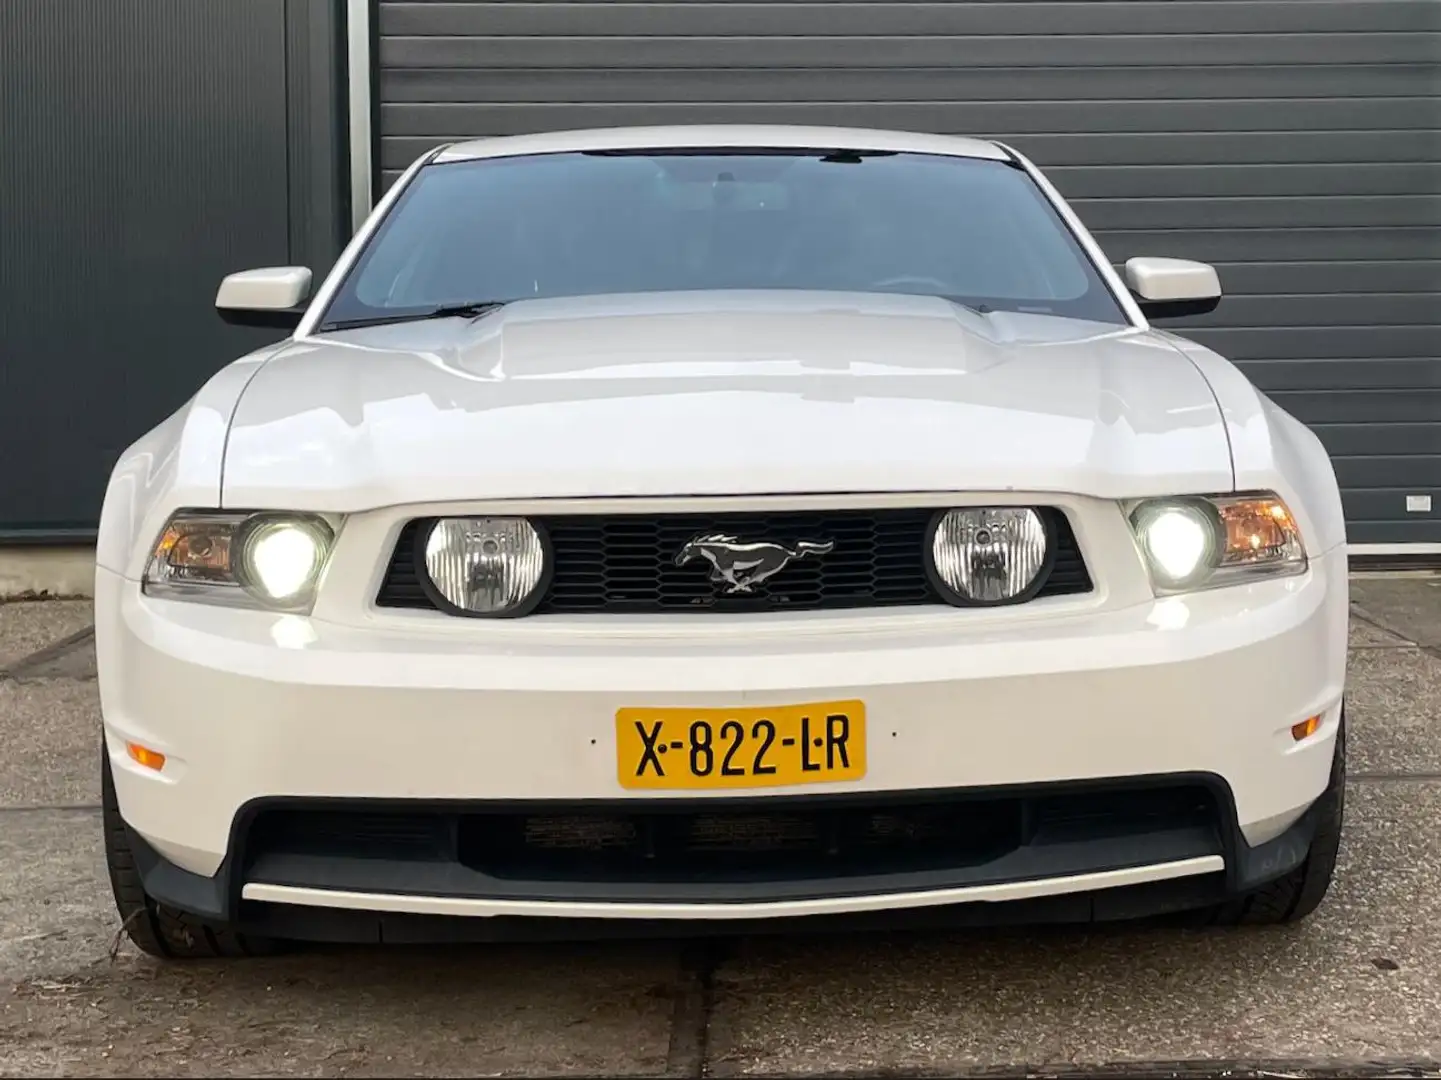 Ford Mustang 5.0 GT V8 Premium. Superauto! Wit - 2